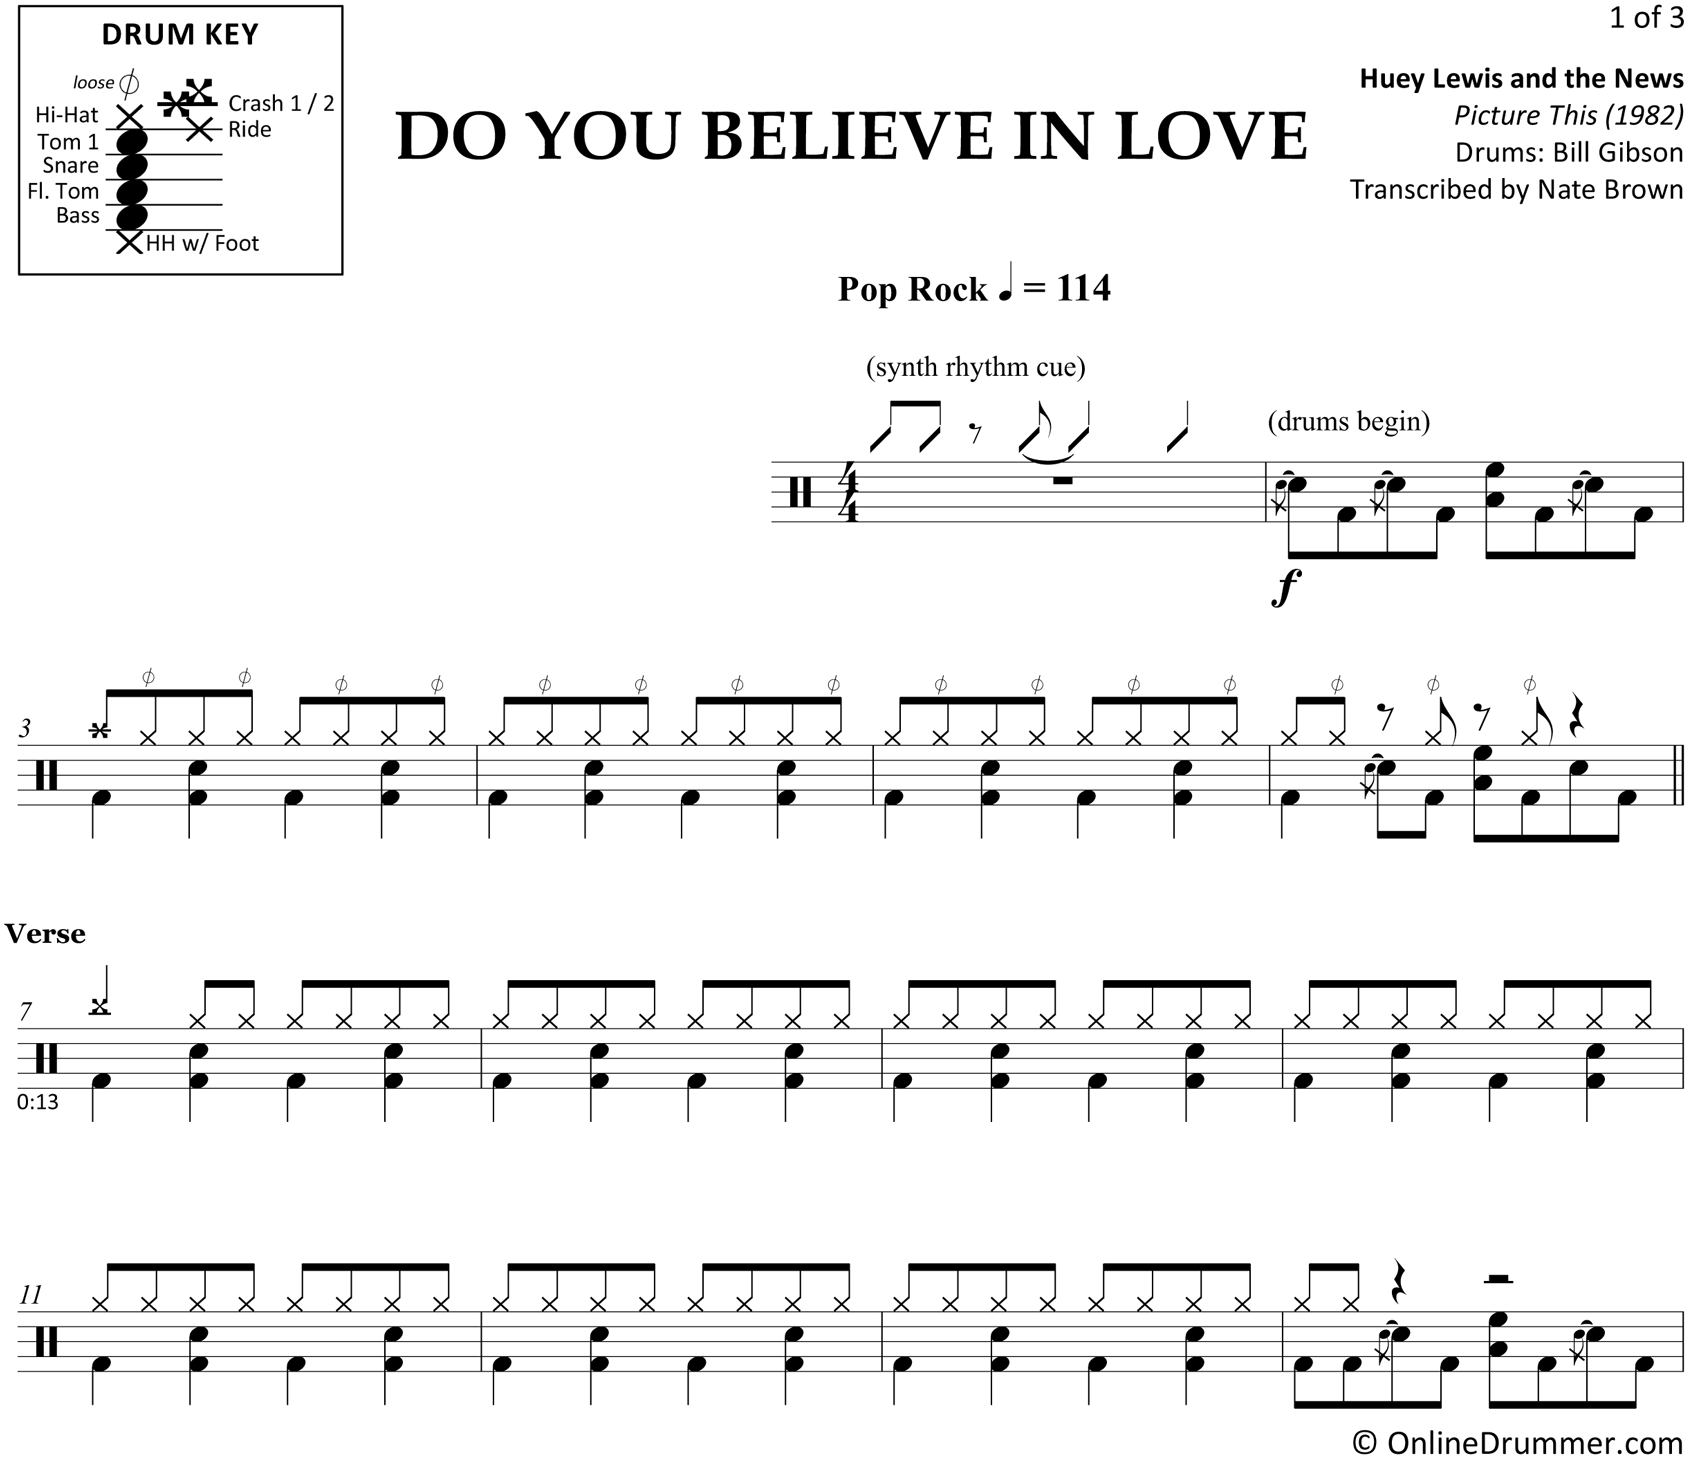 Do You Believe in Love - Huey Lewis and the News - Drum Sheet Music